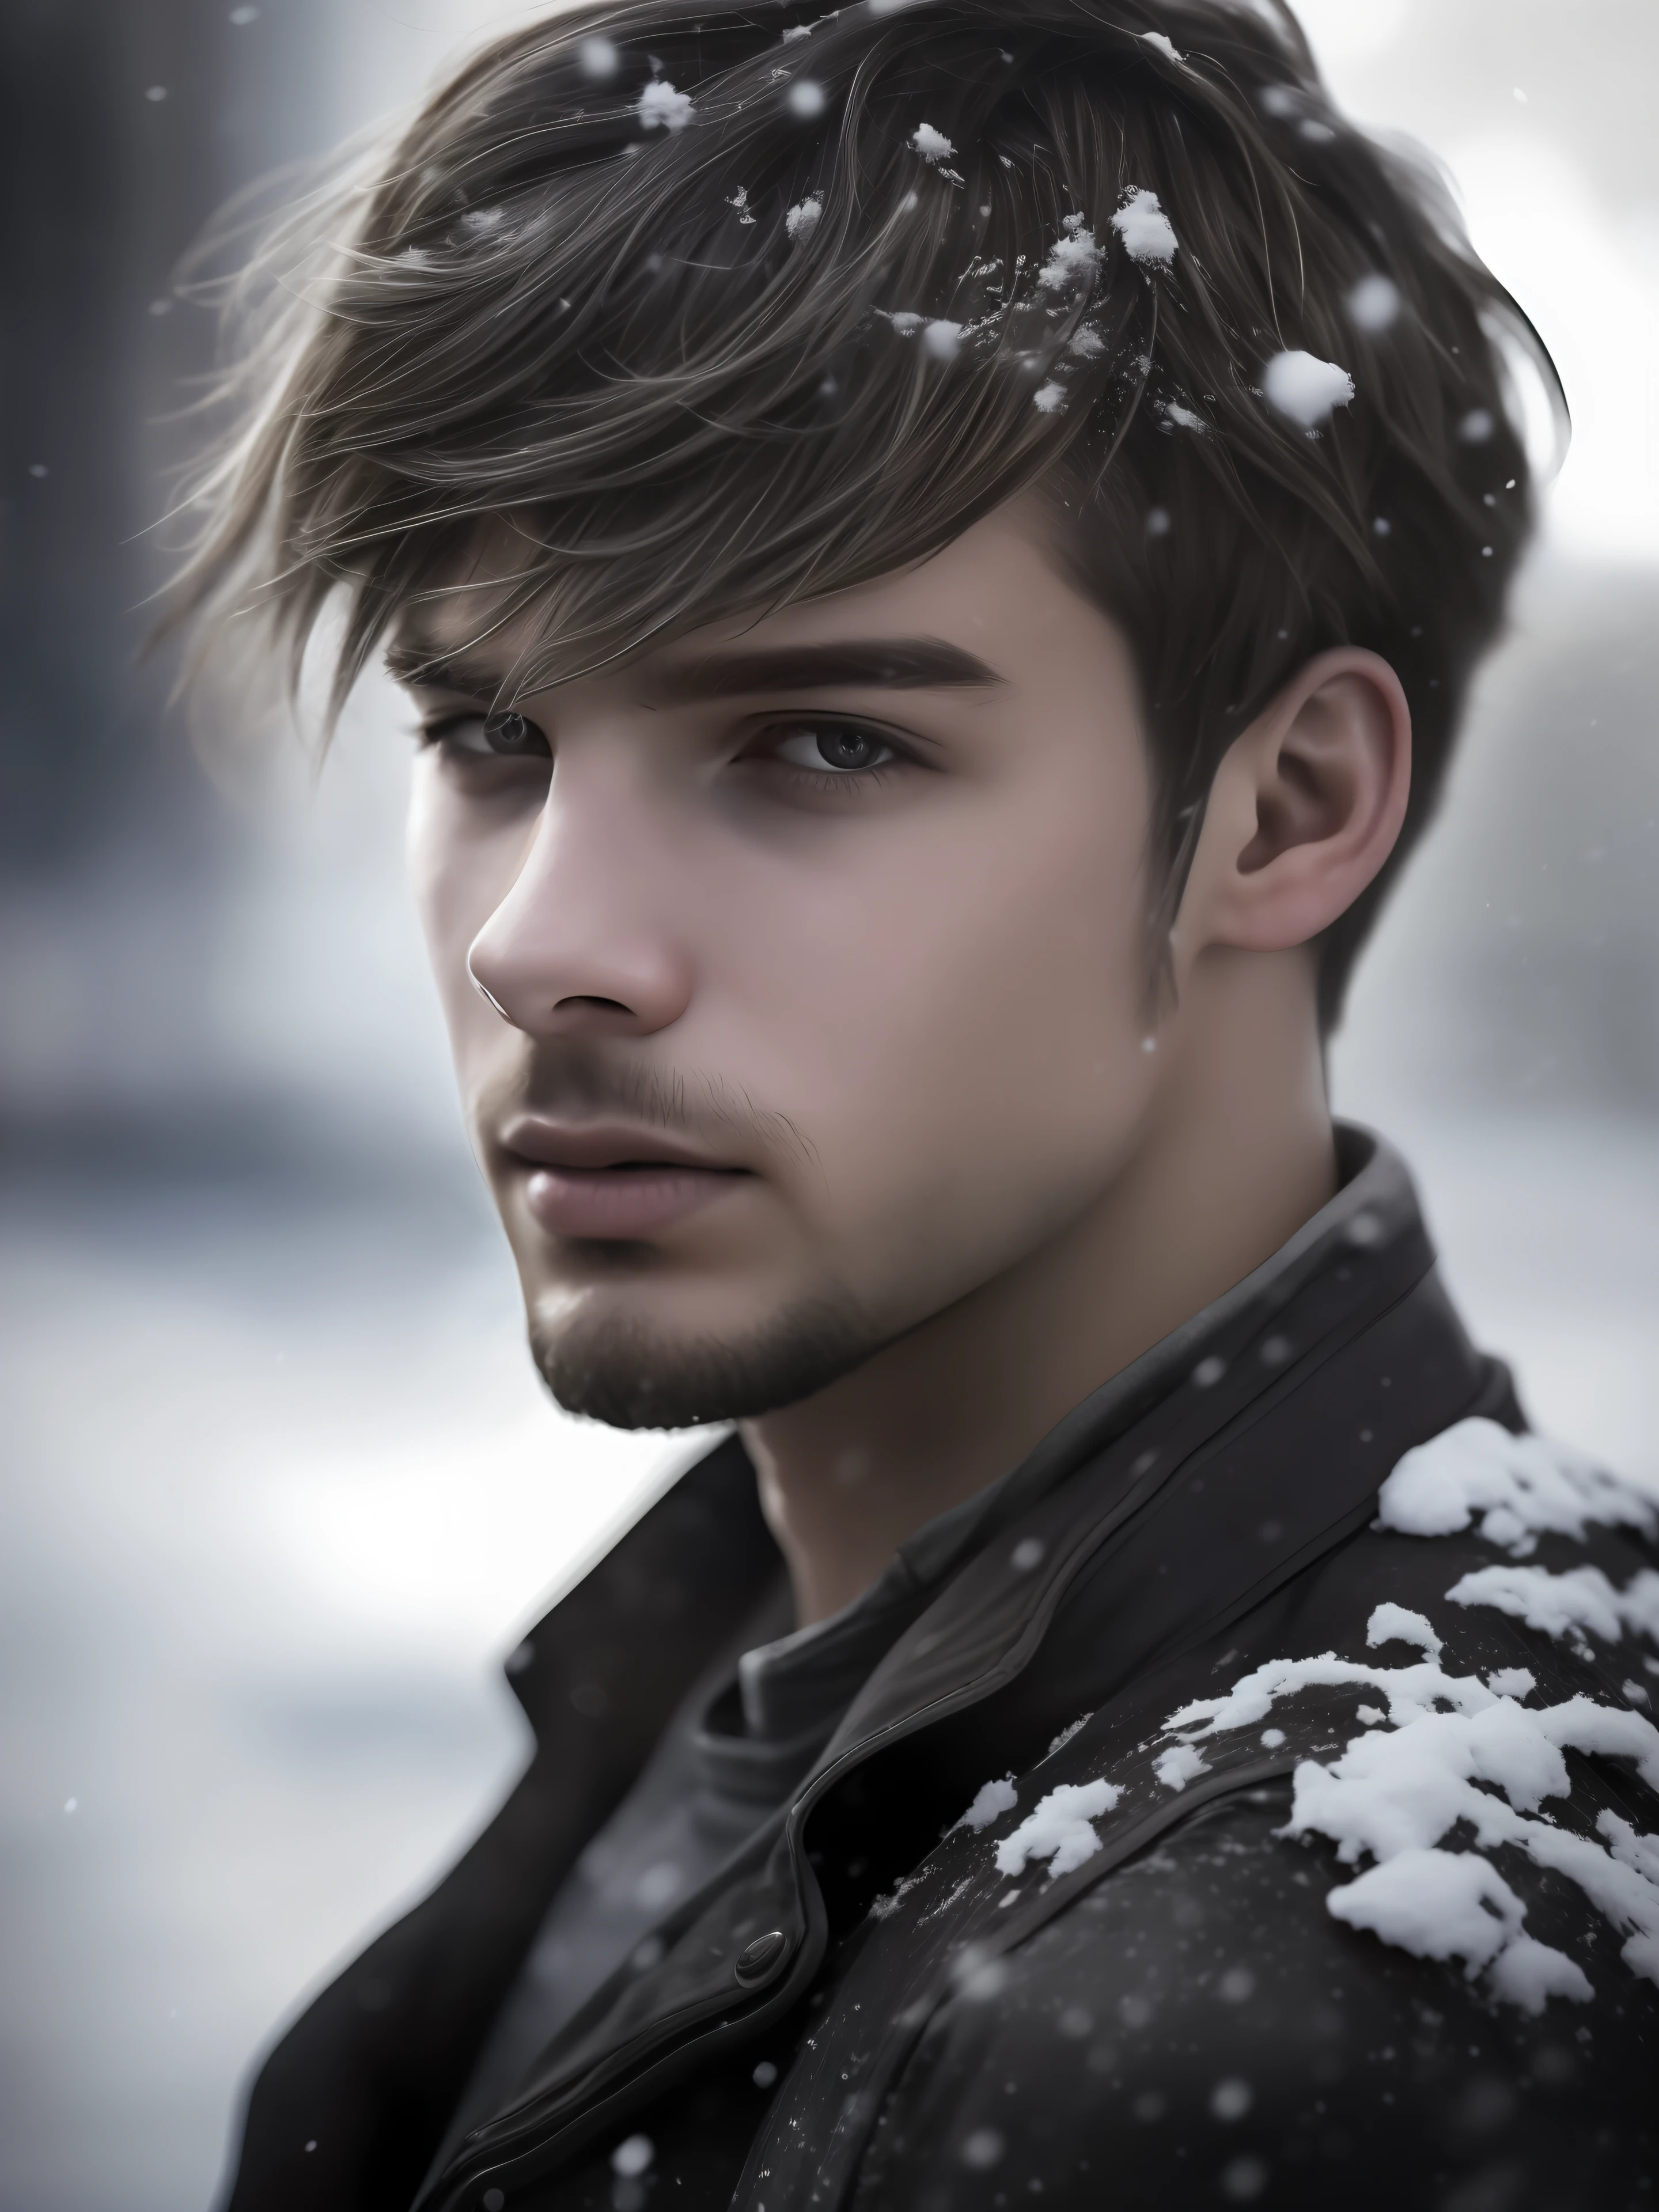 Realistic photography, close-up of dirty young guy aged 15, gray hair, eye focus, 50mm f/1.4, HDR masterpiece, spectacular lighting, epic image, hair in the wind, skin, light snow, post-apocalyptic city, year 2590